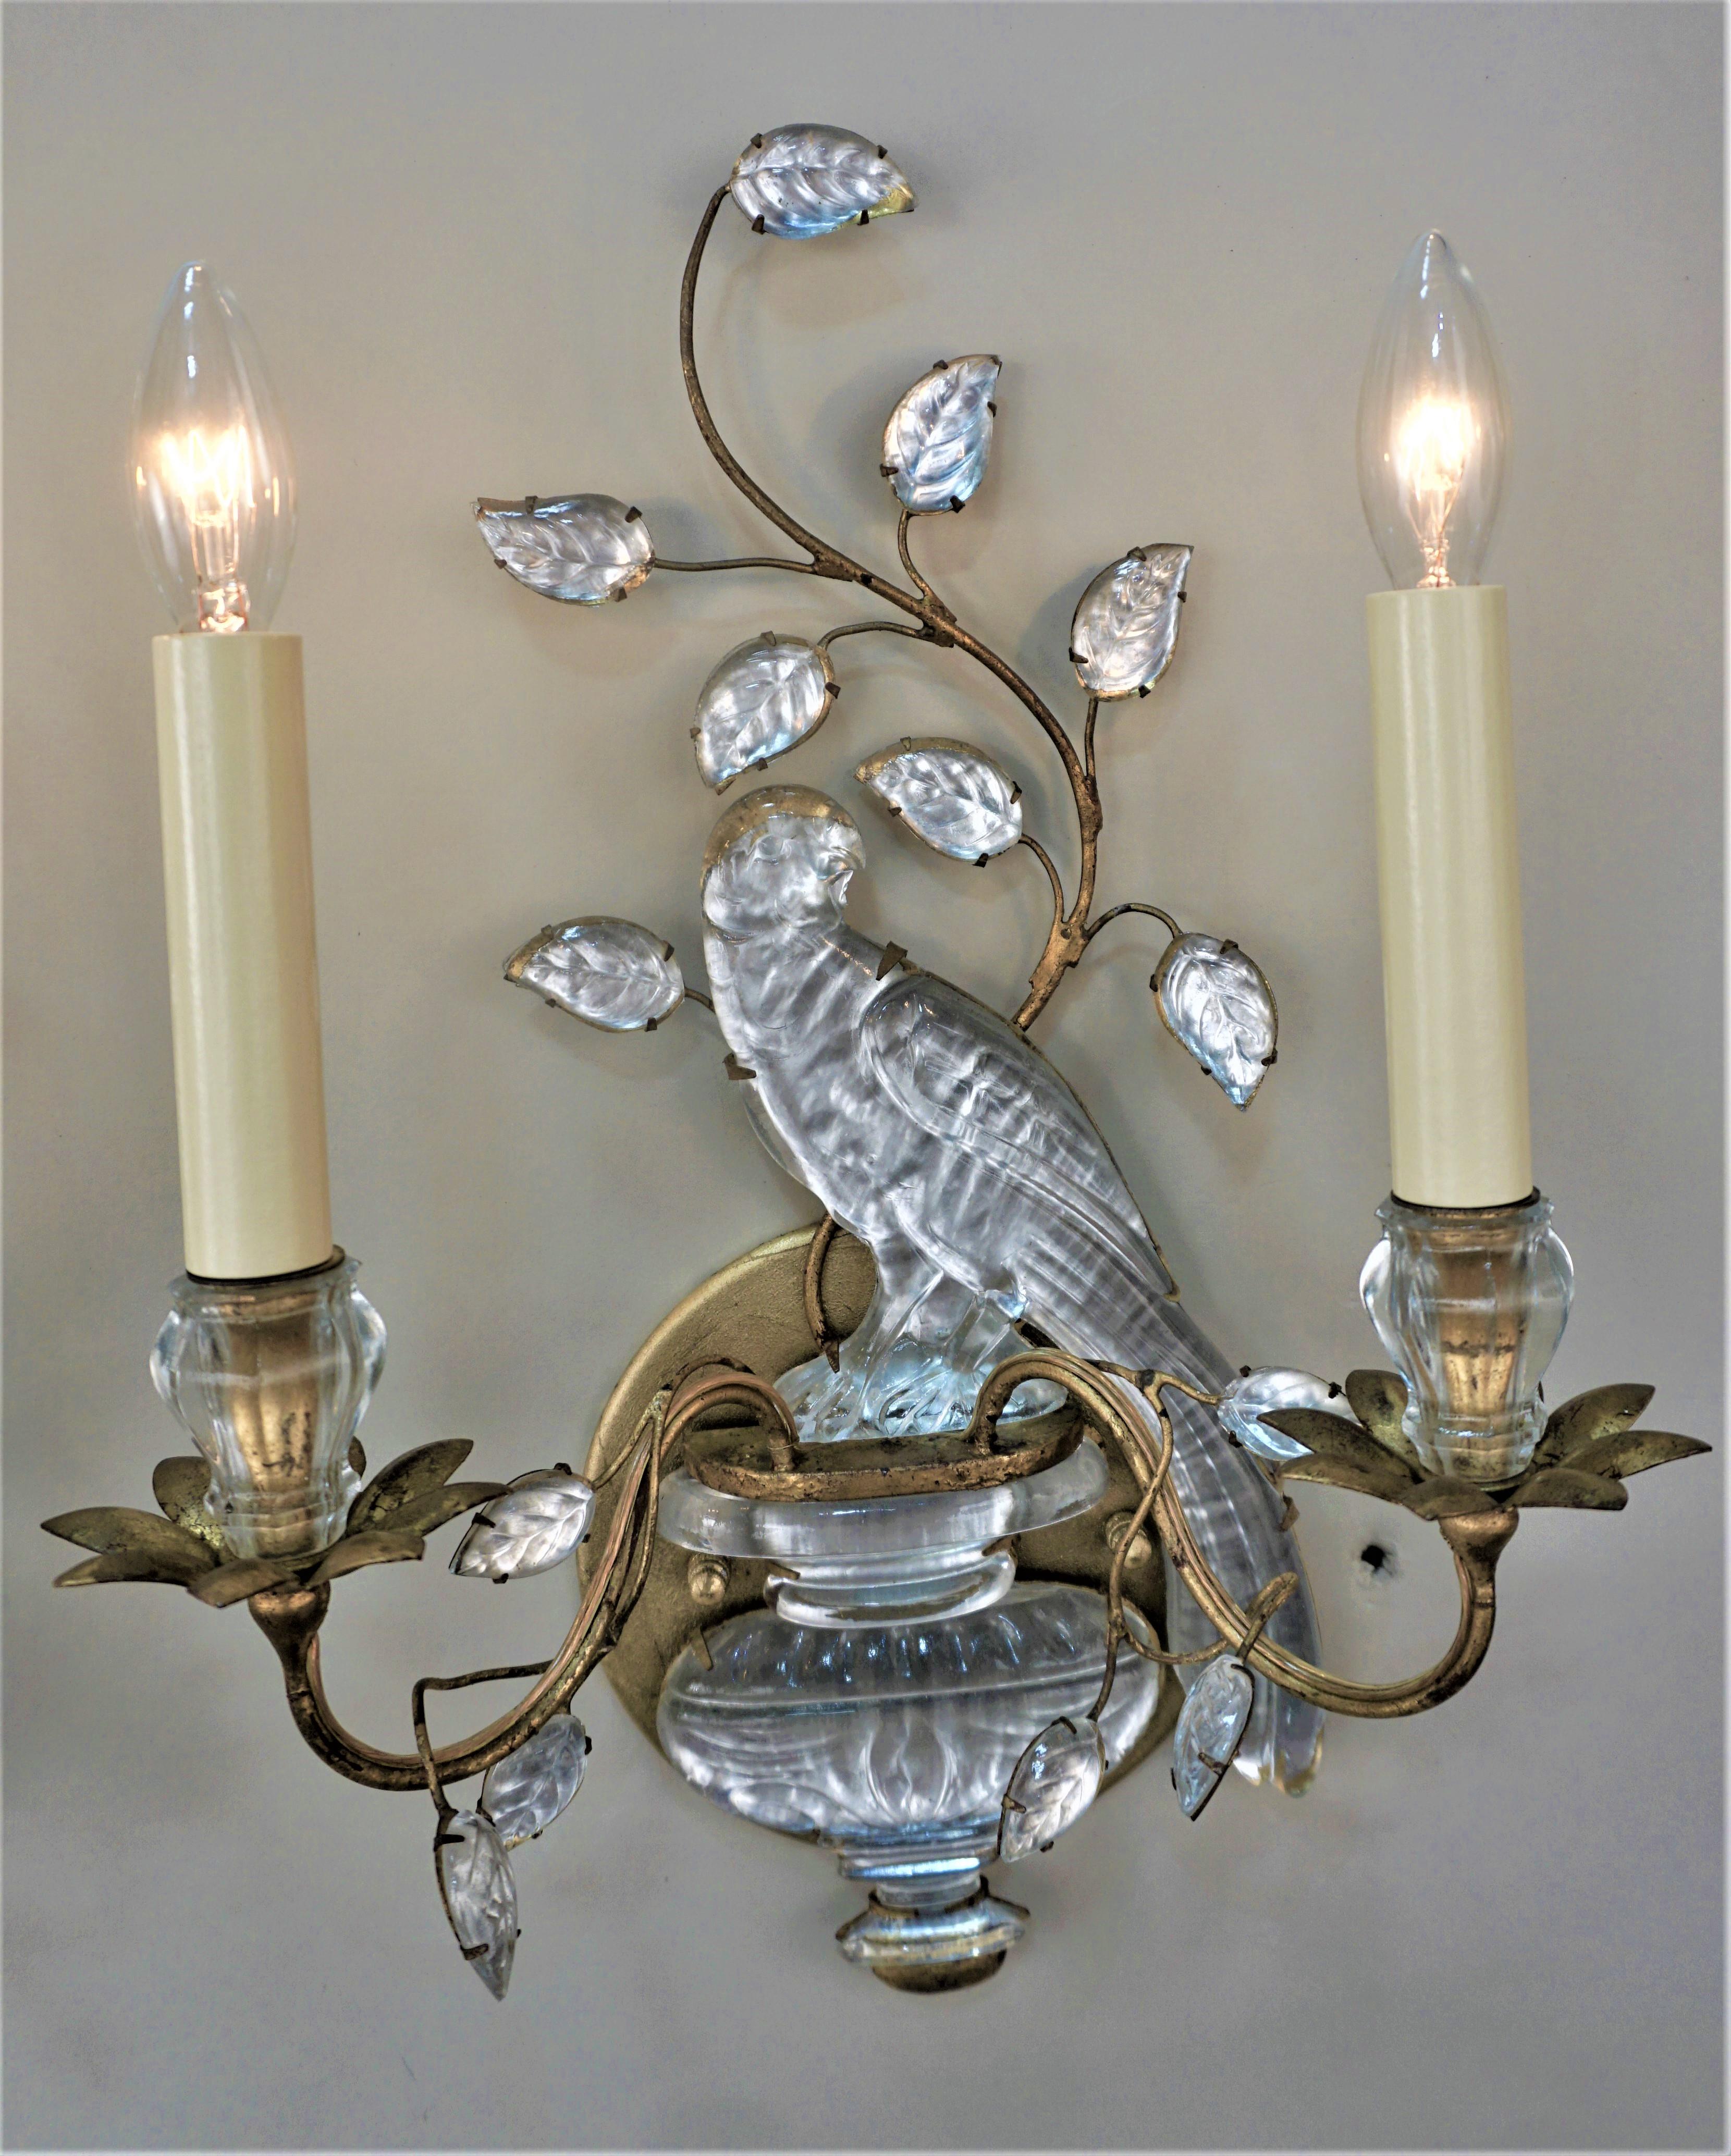 Pair of French Bagues double light wall sconces with gilt iron frames and mounted with molded glass bird over a vase.